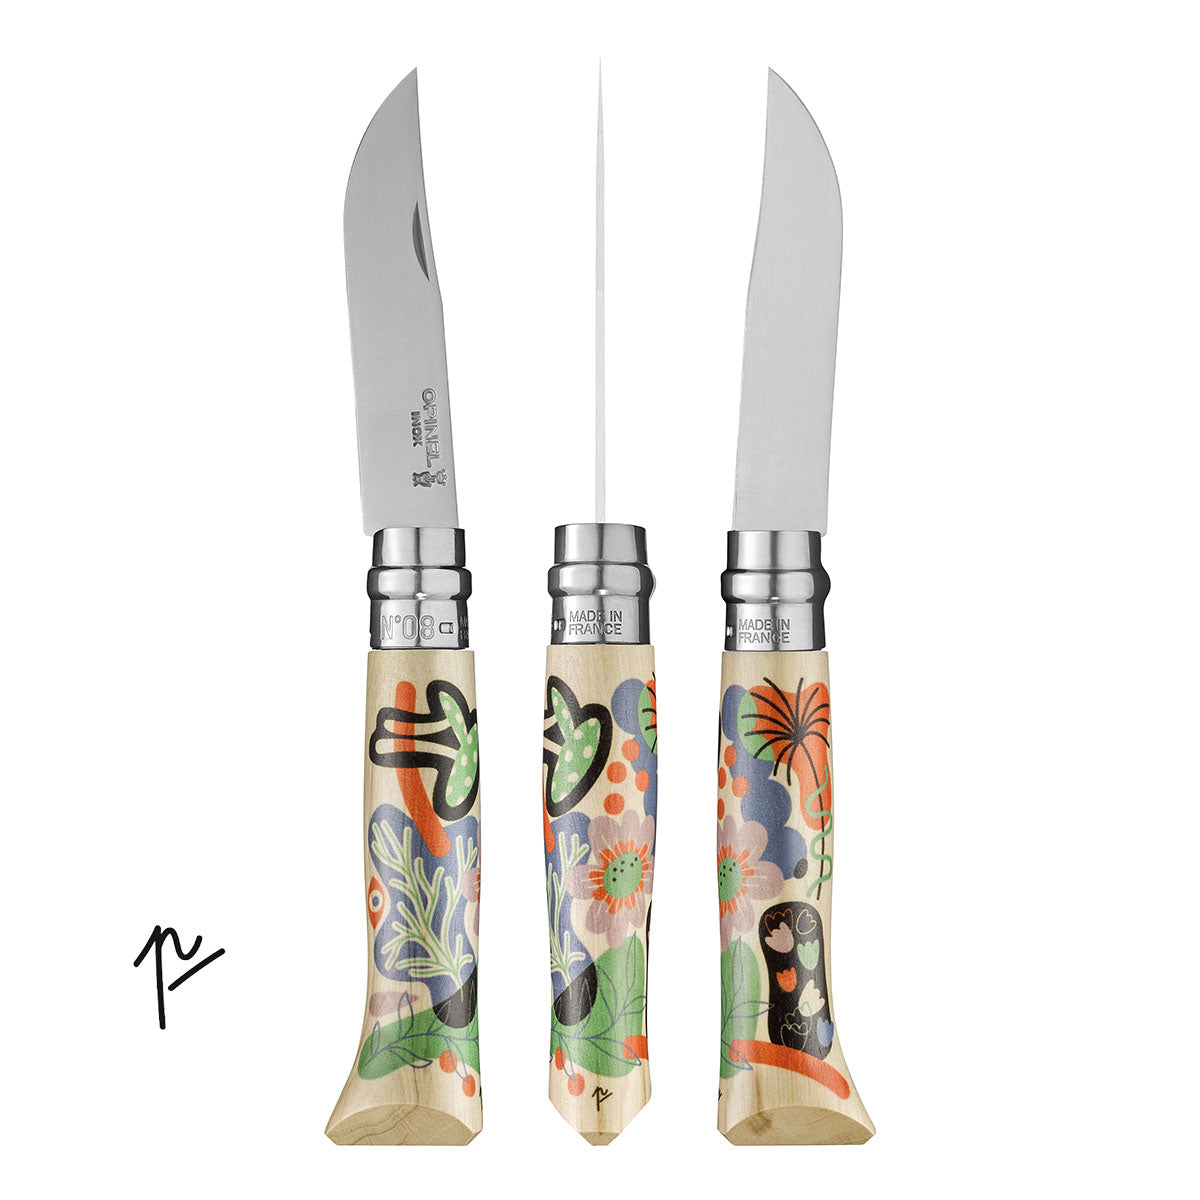 Opinel  No.02 Stainless Steel Folding Knife - OPINEL USA